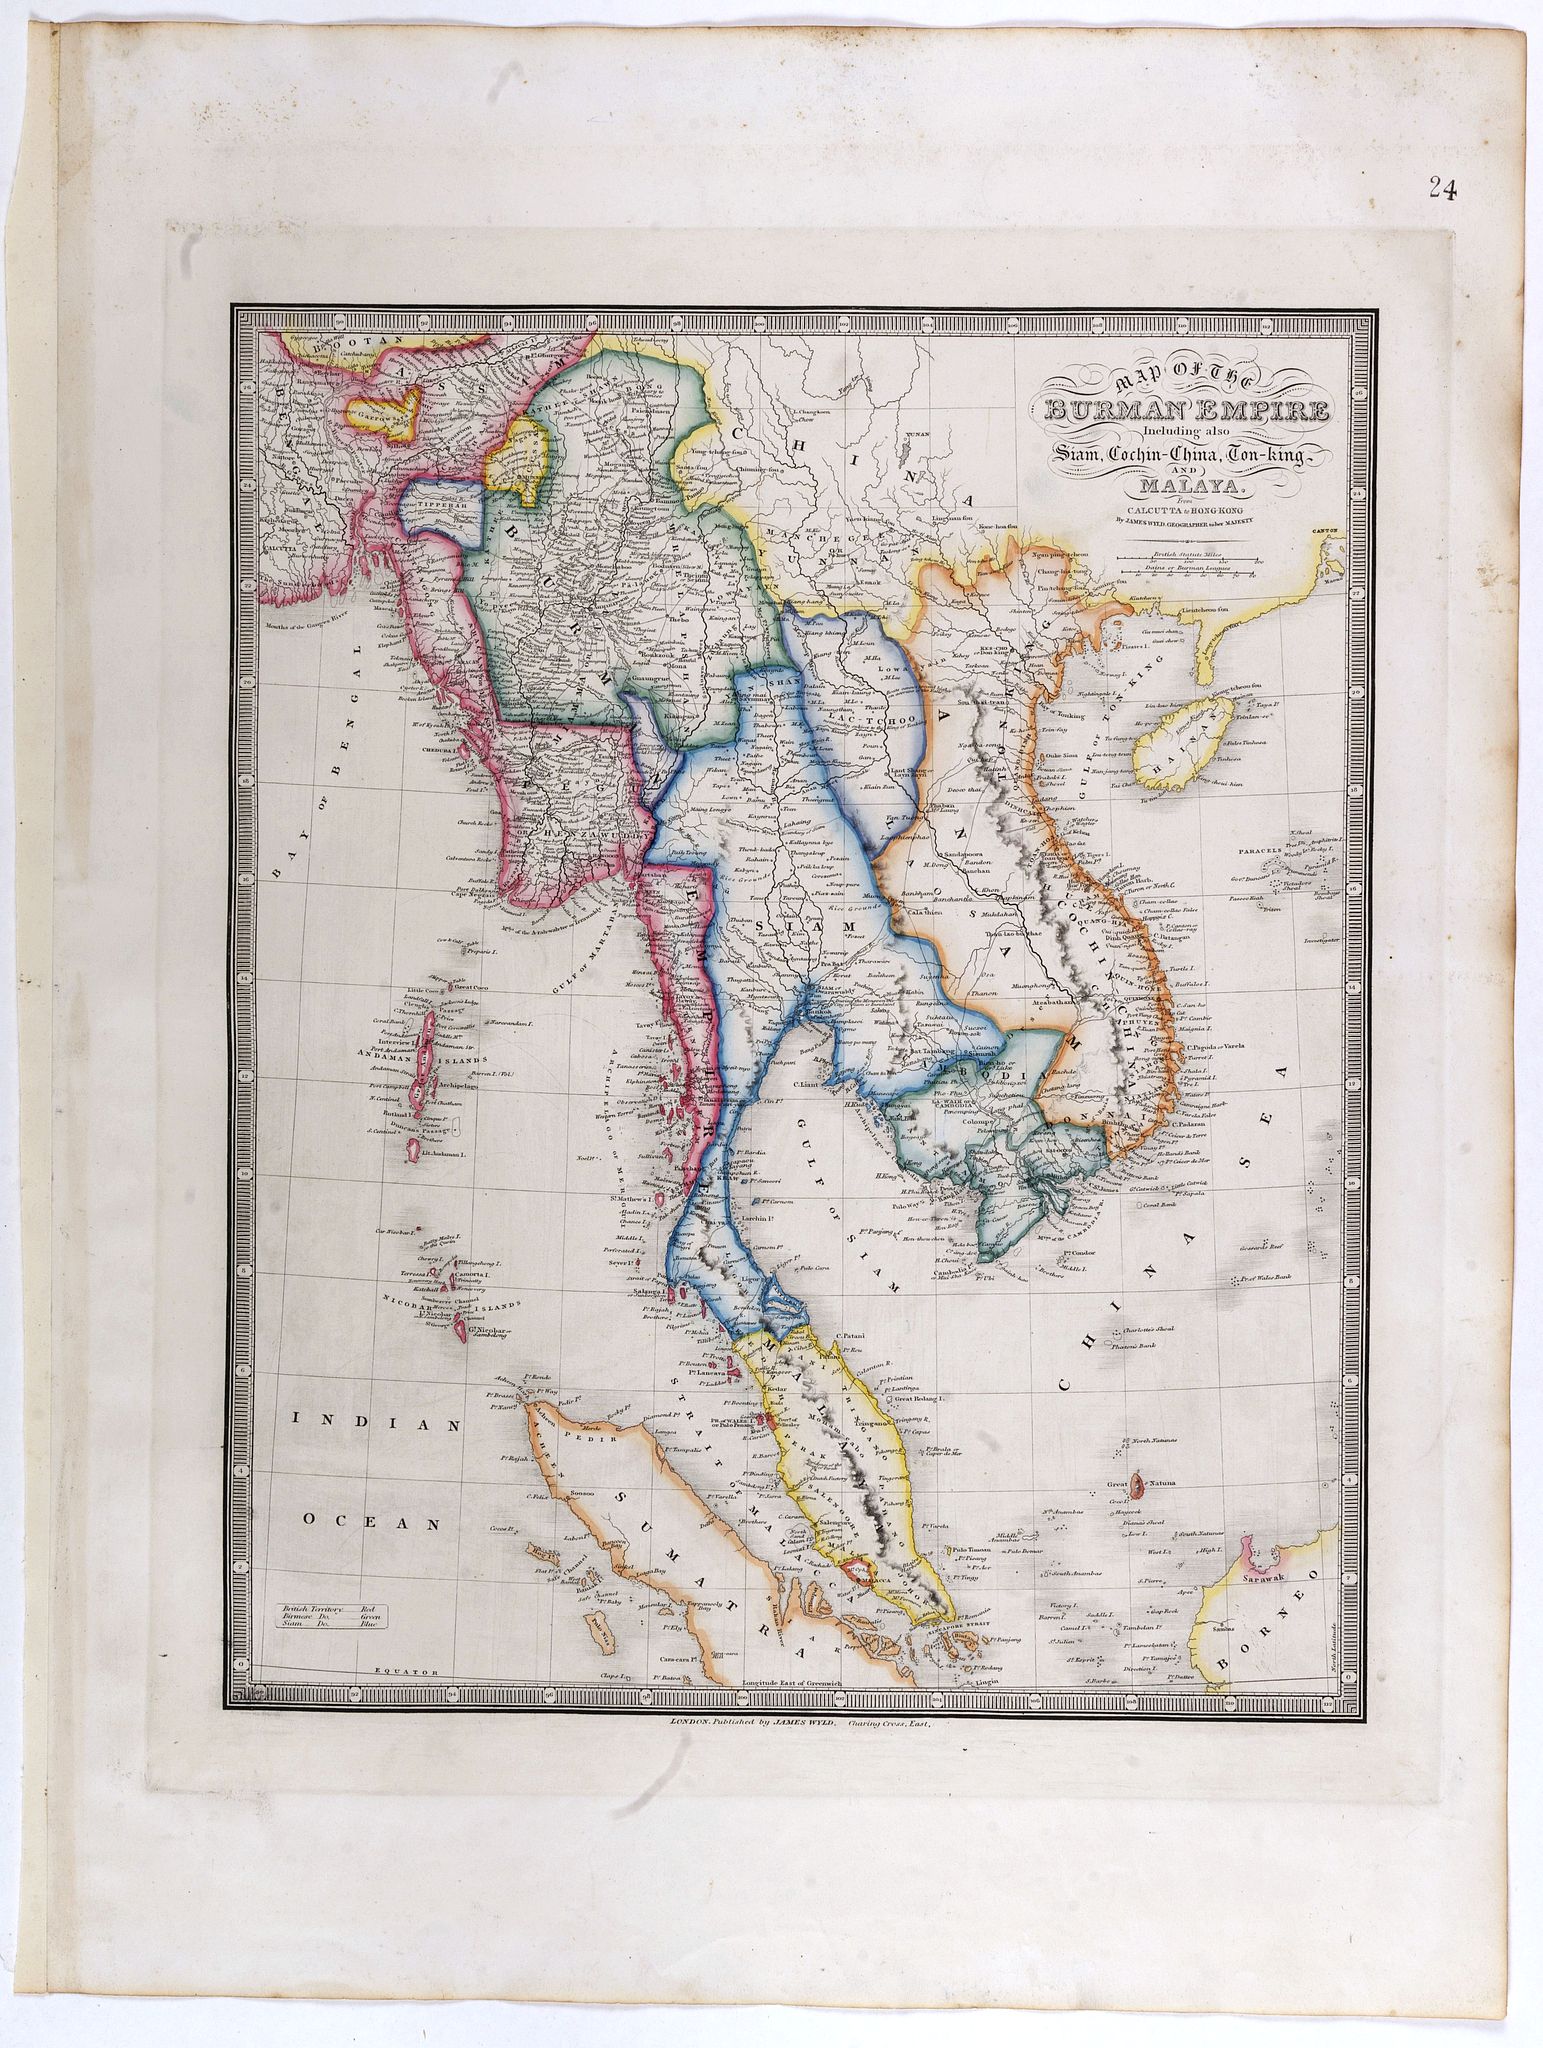 Map of the Burman Empire Including also Siam, Cochin-China, Ton-King and Malaya from Calcutta to Hong Kong